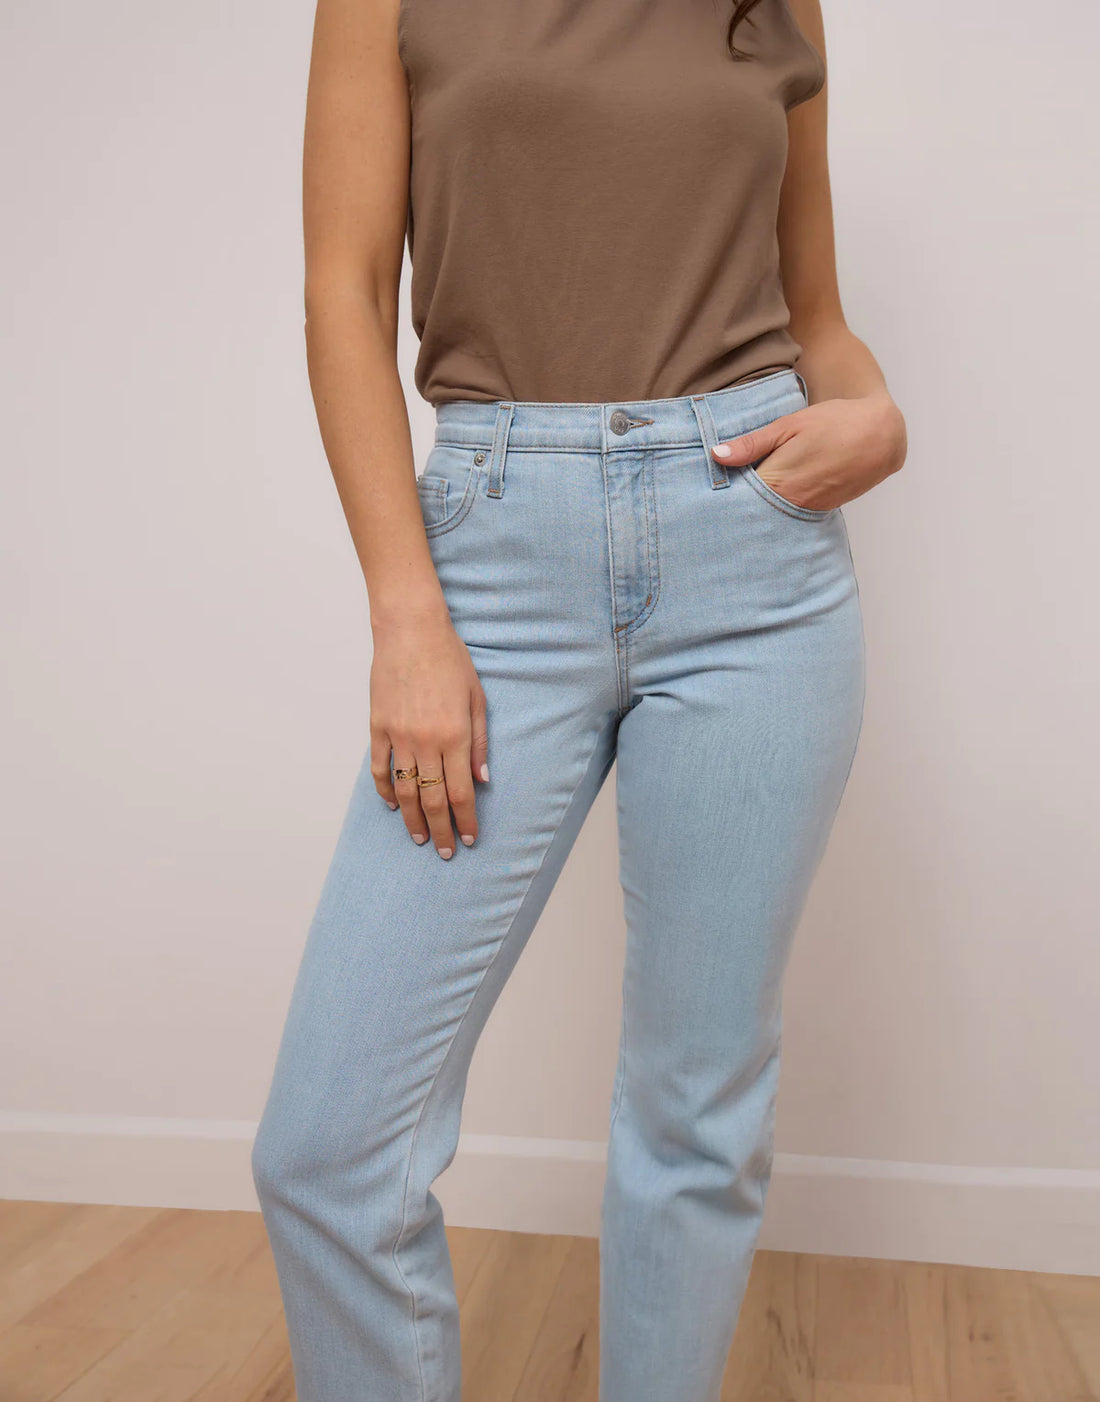 Jeans Emily Pure Yoga Jeans